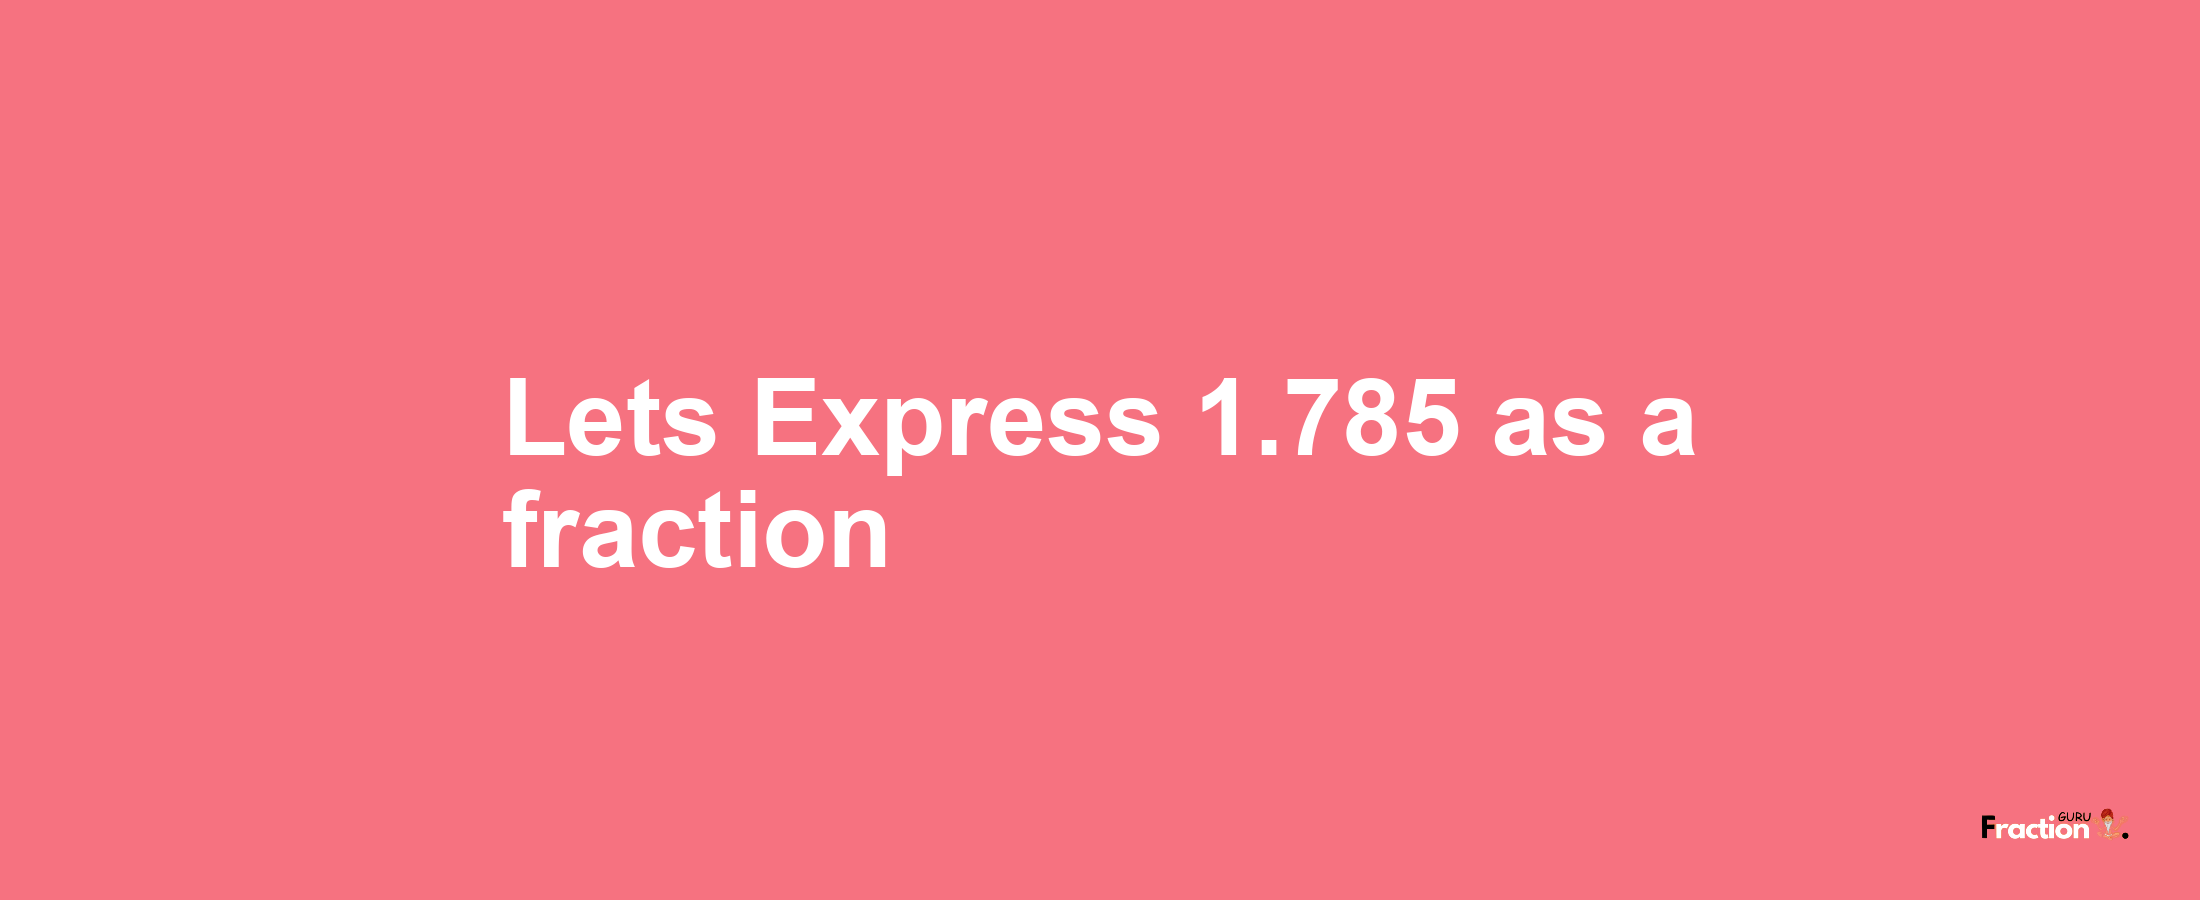 Lets Express 1.785 as afraction